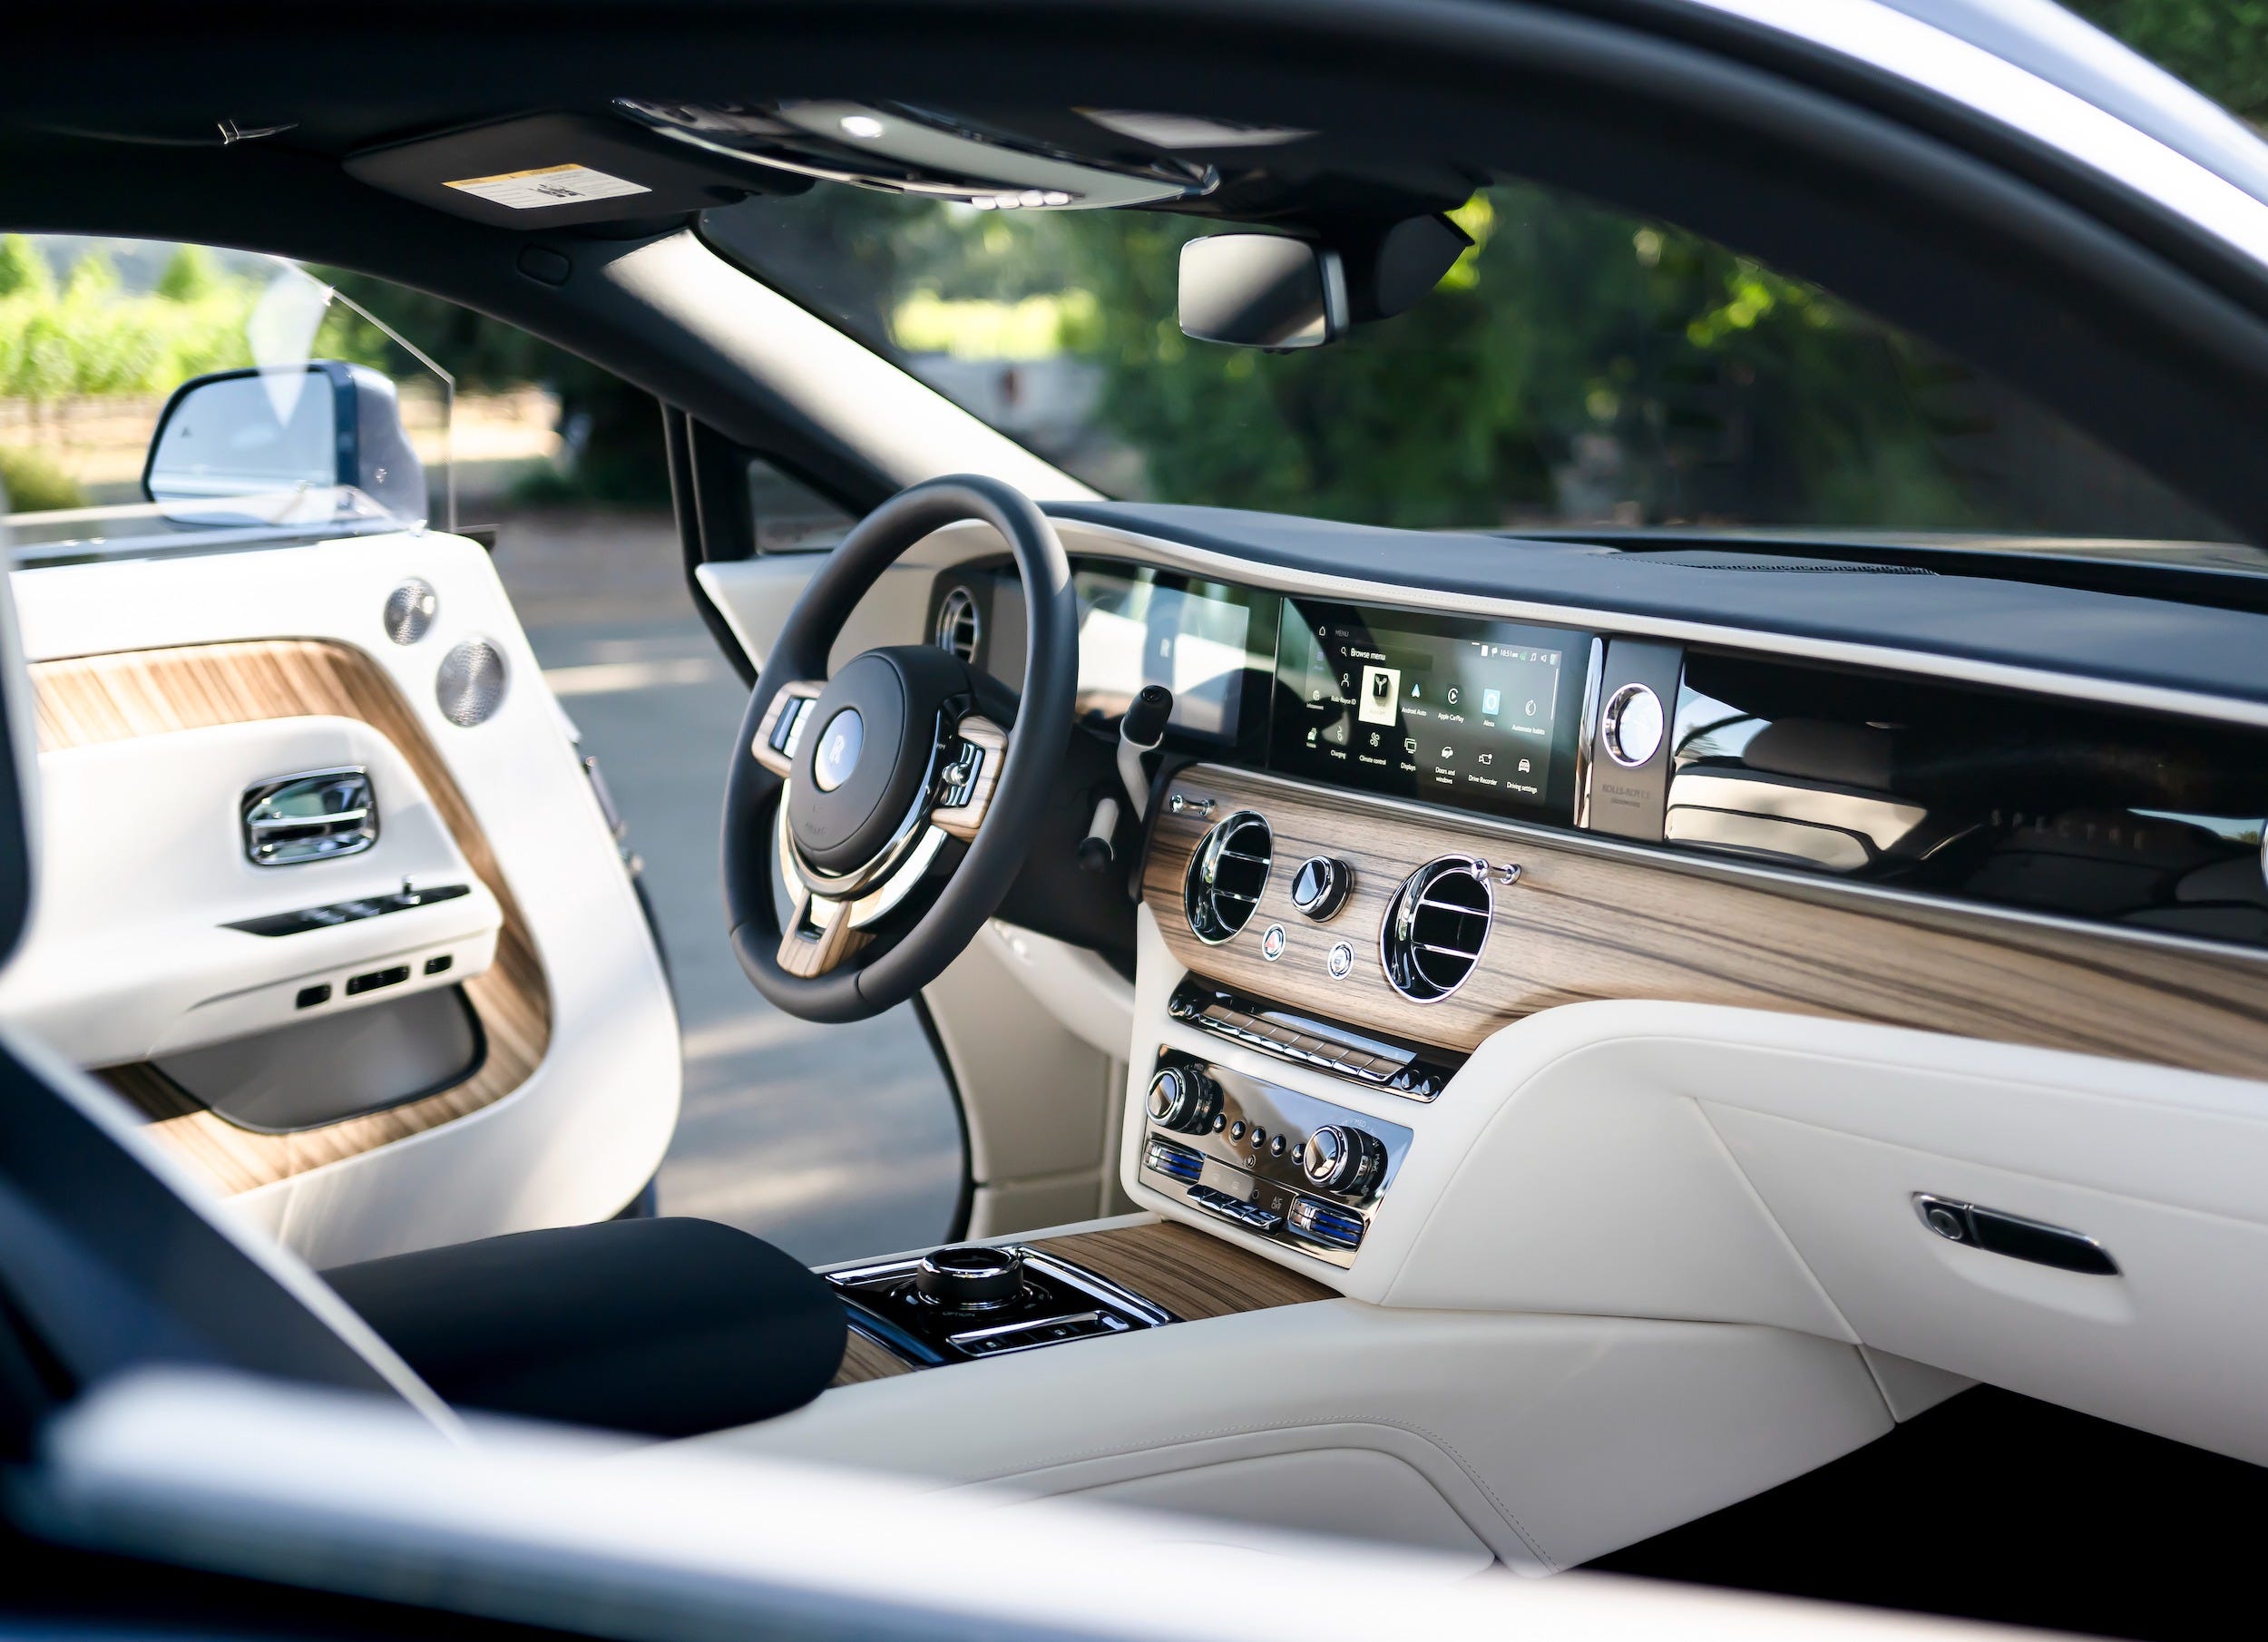 The wood and white-leather interior of a Rolls-Royce Spectre electric car.